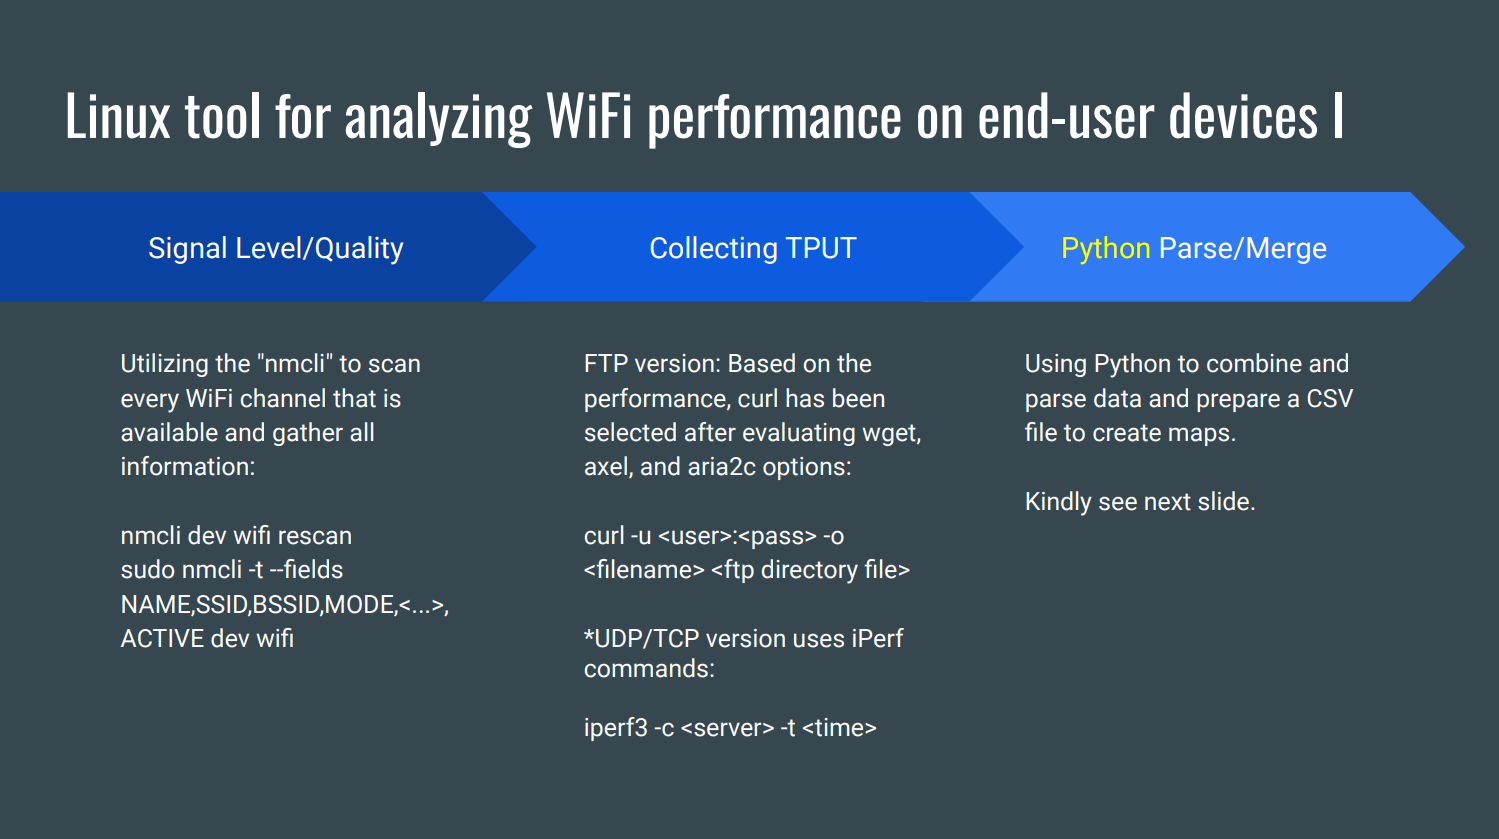 Linux tool for analyzing WiFi performance on end-user devices I